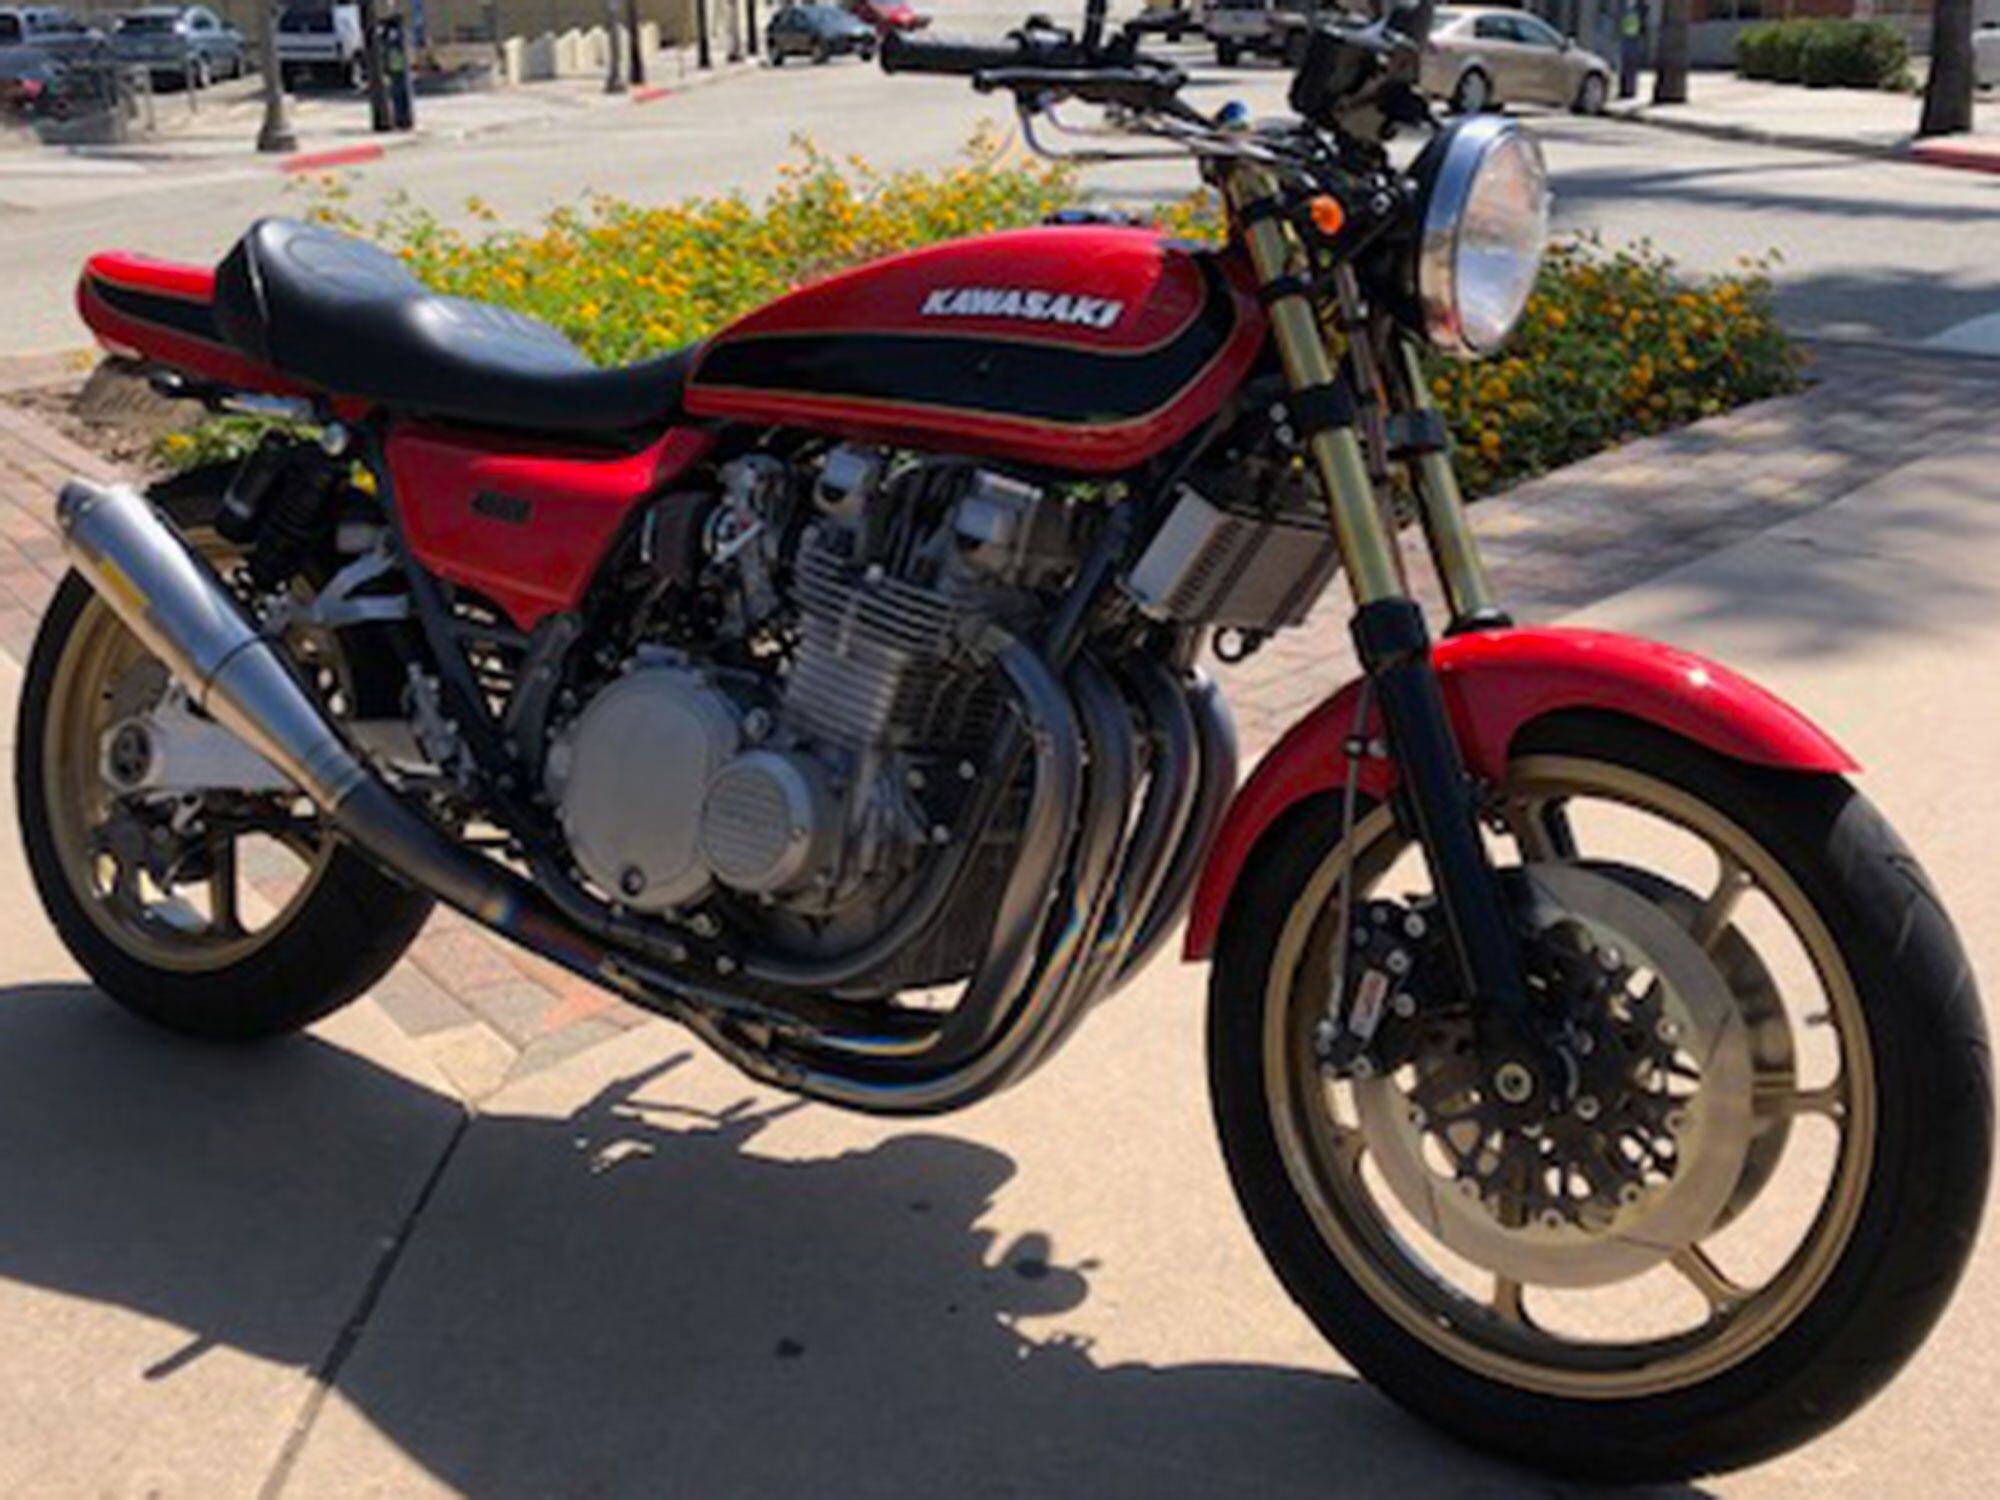 …to here. Imagine, budget, build. Money spent on project bikes pays lifelong dividends. What price joy? More than 2,500 miles of smiles so far for Evan Grosswirth and his exquisite HyperCycle KZ1000.